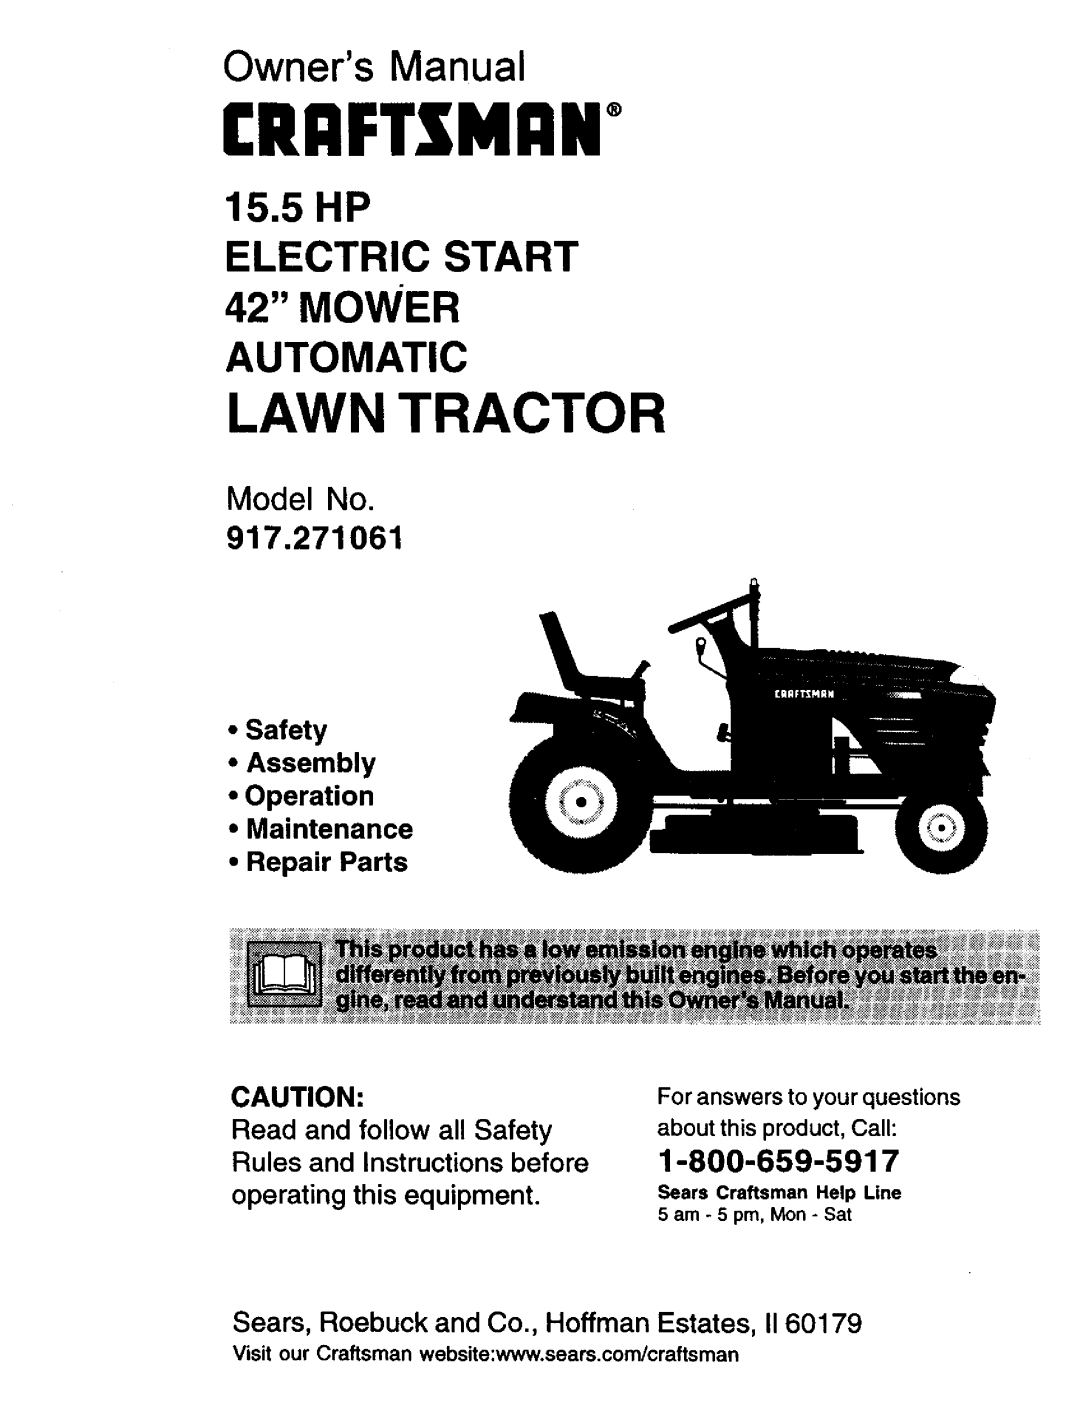 Craftsman 917.271061 owner manual •Safety •Assembly •Operation •Maintenance, Repair Parts, operating this equipment 